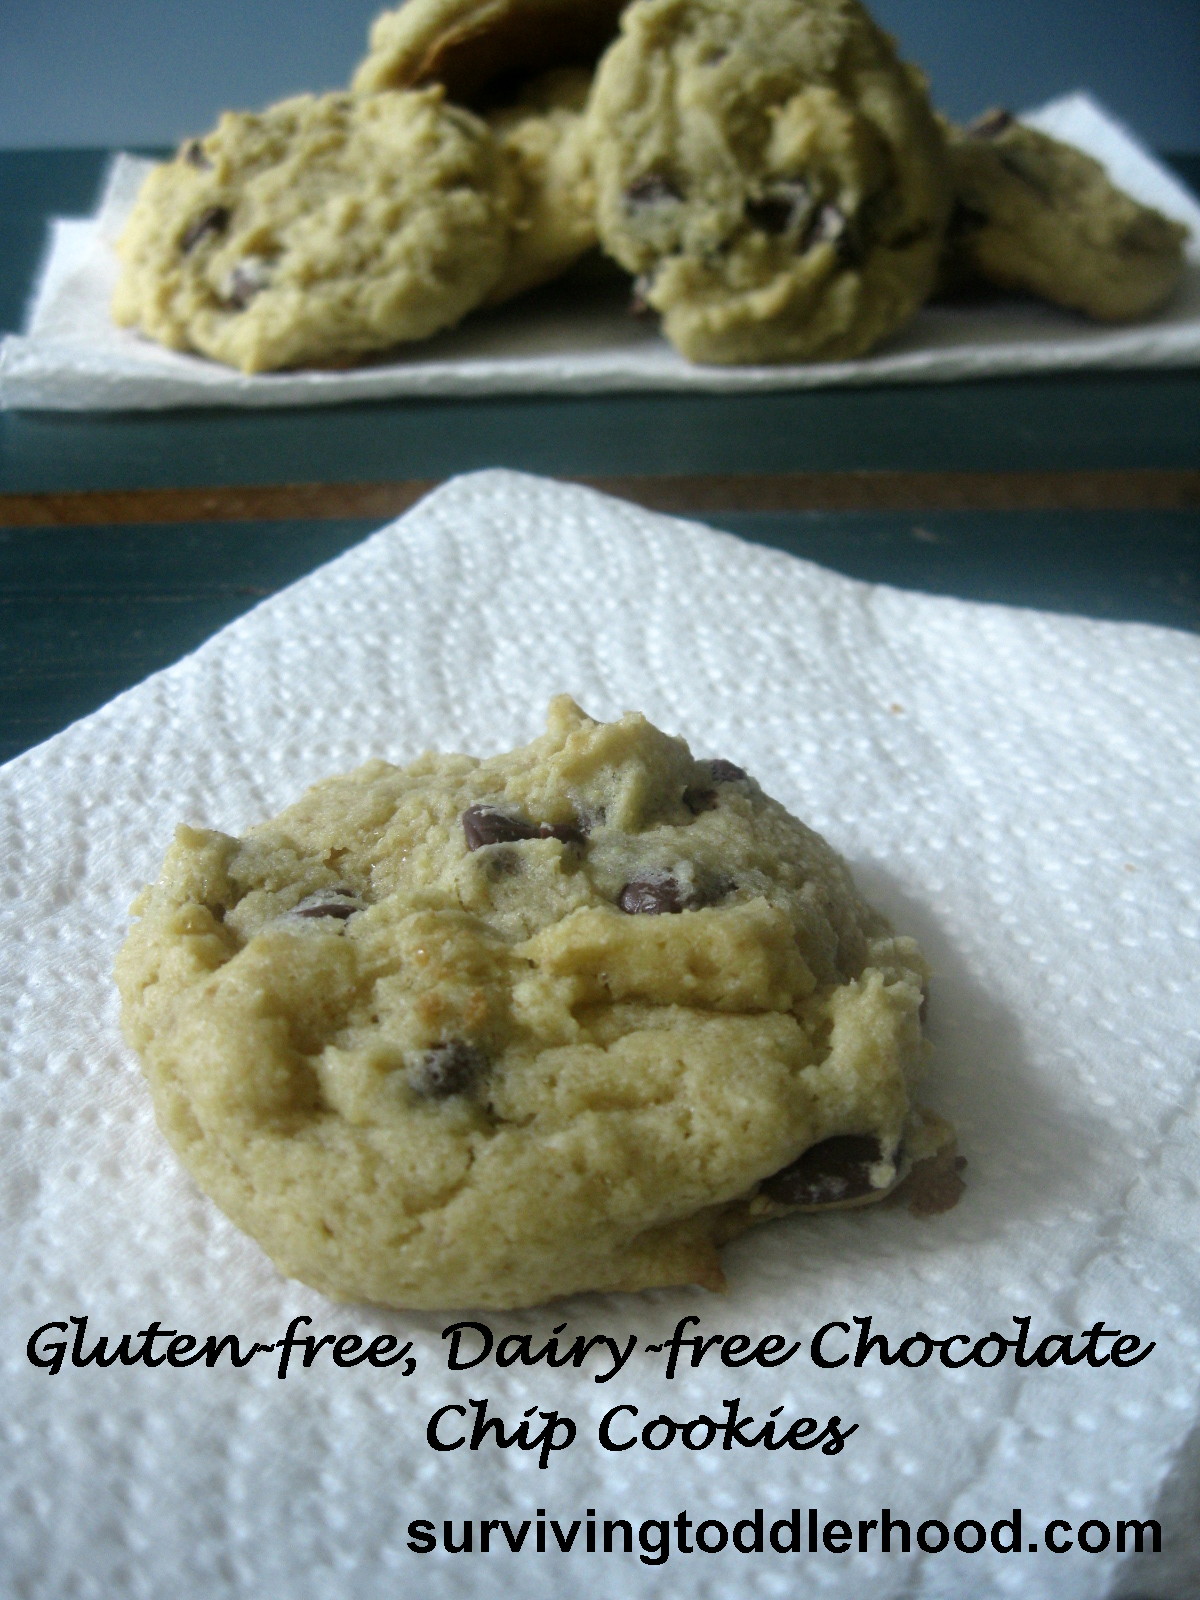 The Perfect Gluten-free, Dairy-free Chocolate Chip Cookie